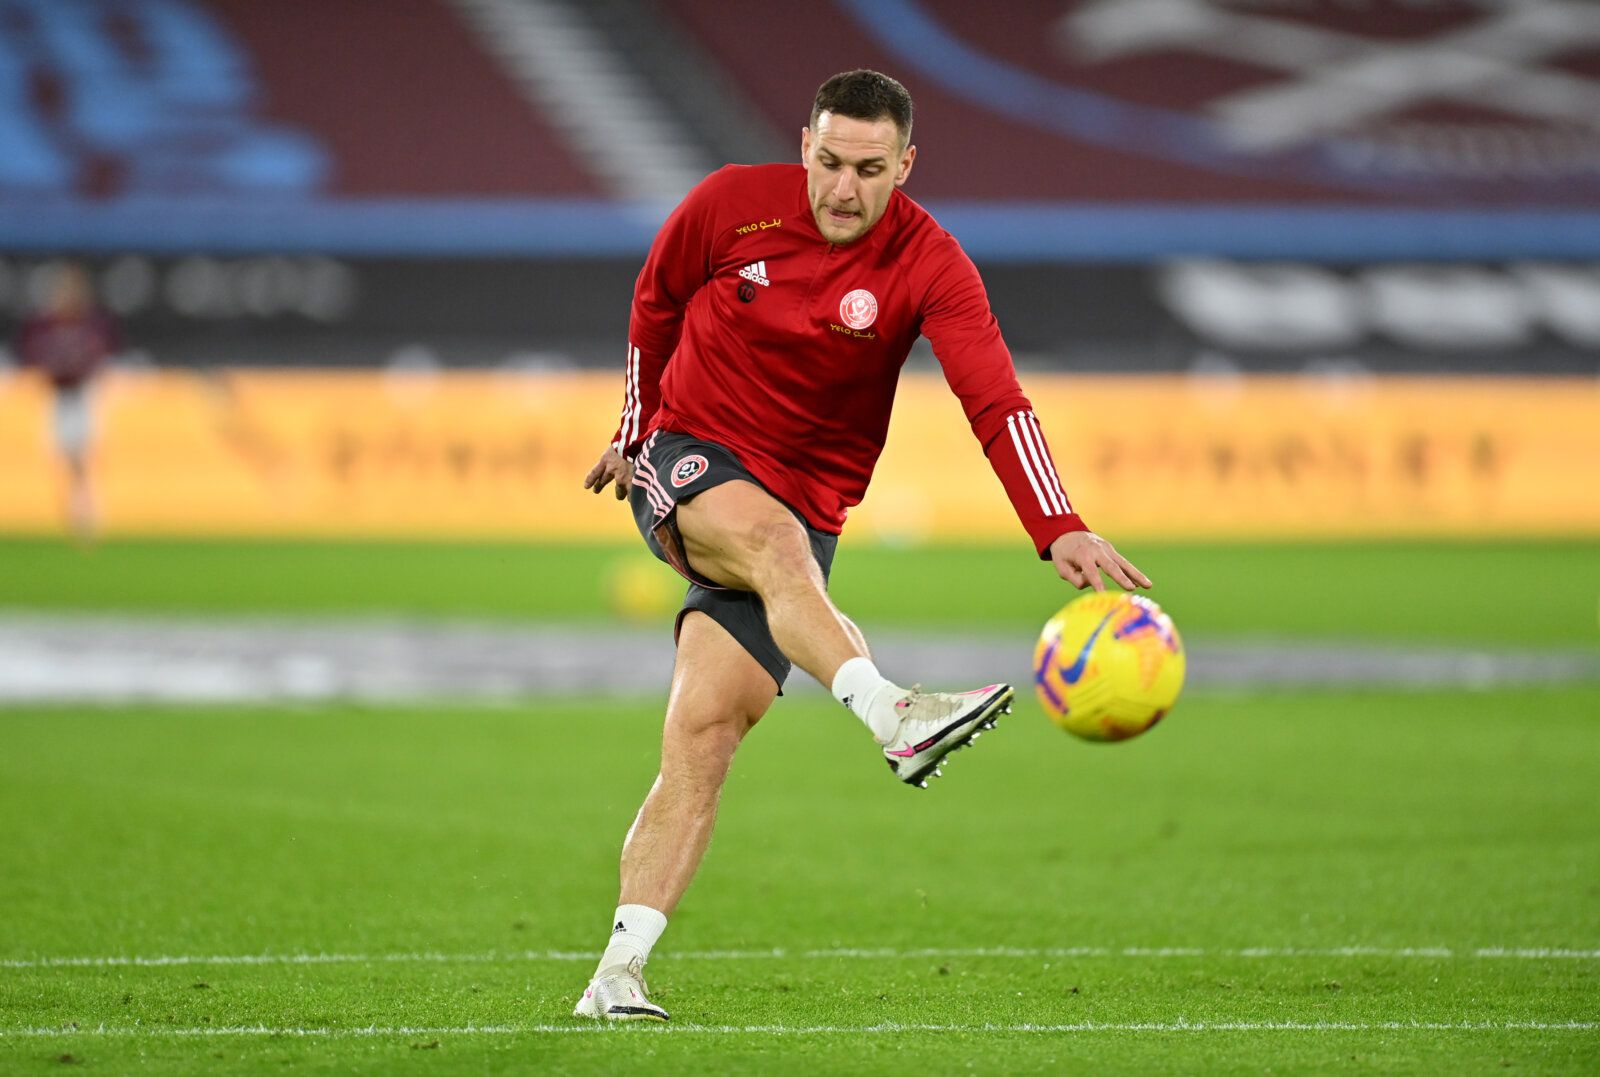 Soccer Football - Premier League - West Ham United v Sheffield United - London Stadium, London, Britain - February 15, 2021 Sheffield United's Billy Sharp during the warm up before the match Pool via REUTERS/Justin Setterfield EDITORIAL USE ONLY. No use with unauthorized audio, video, data, fixture lists, club/league logos or 'live' services. Online in-match use limited to 75 images, no video emulation. No use in betting, games or single club /league/player publications.  Please contact your acc